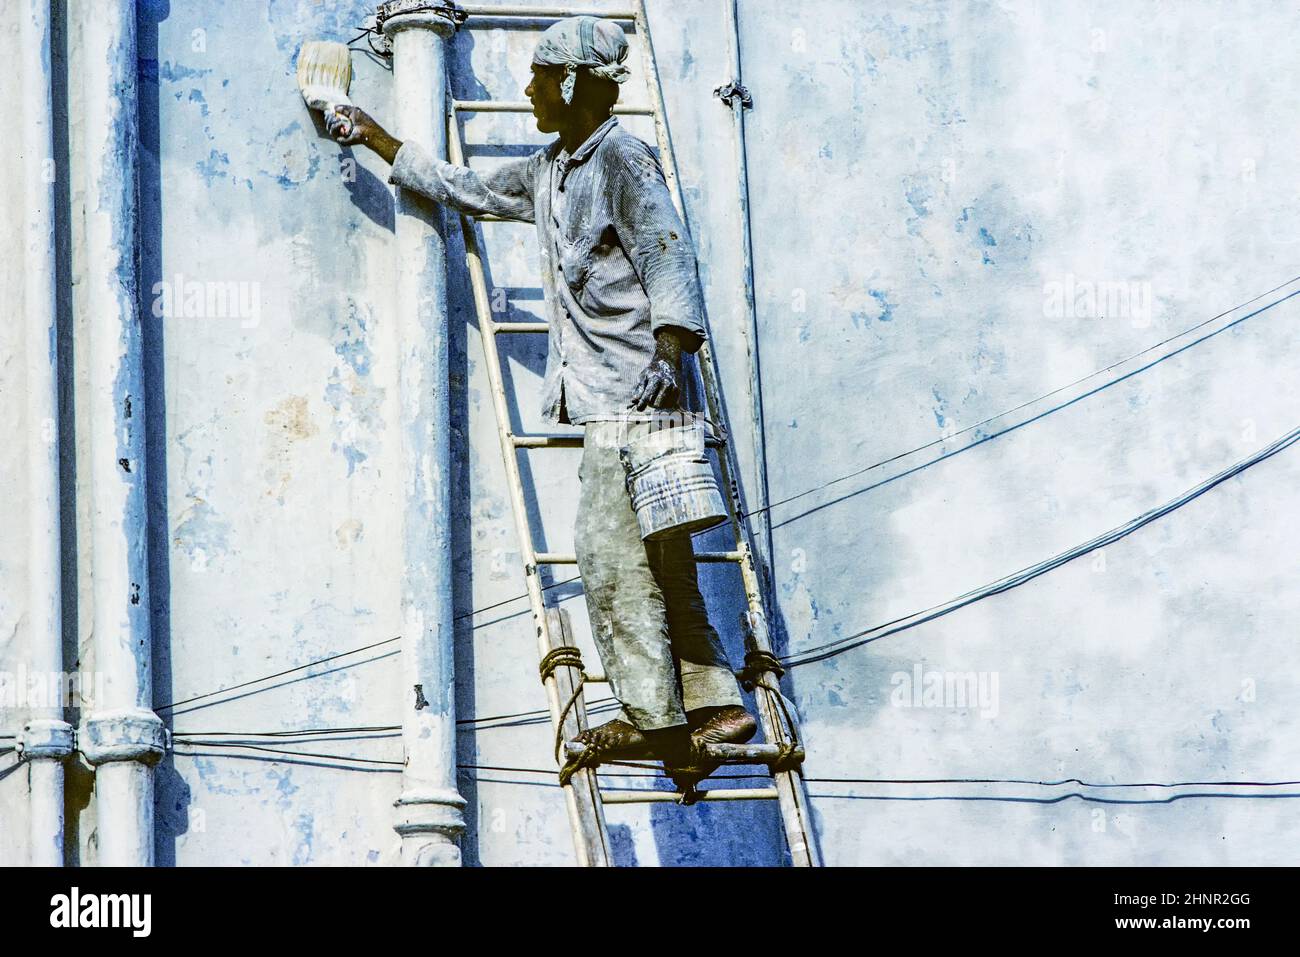 local painter paints the old wall in the typical blue color Stock Photo